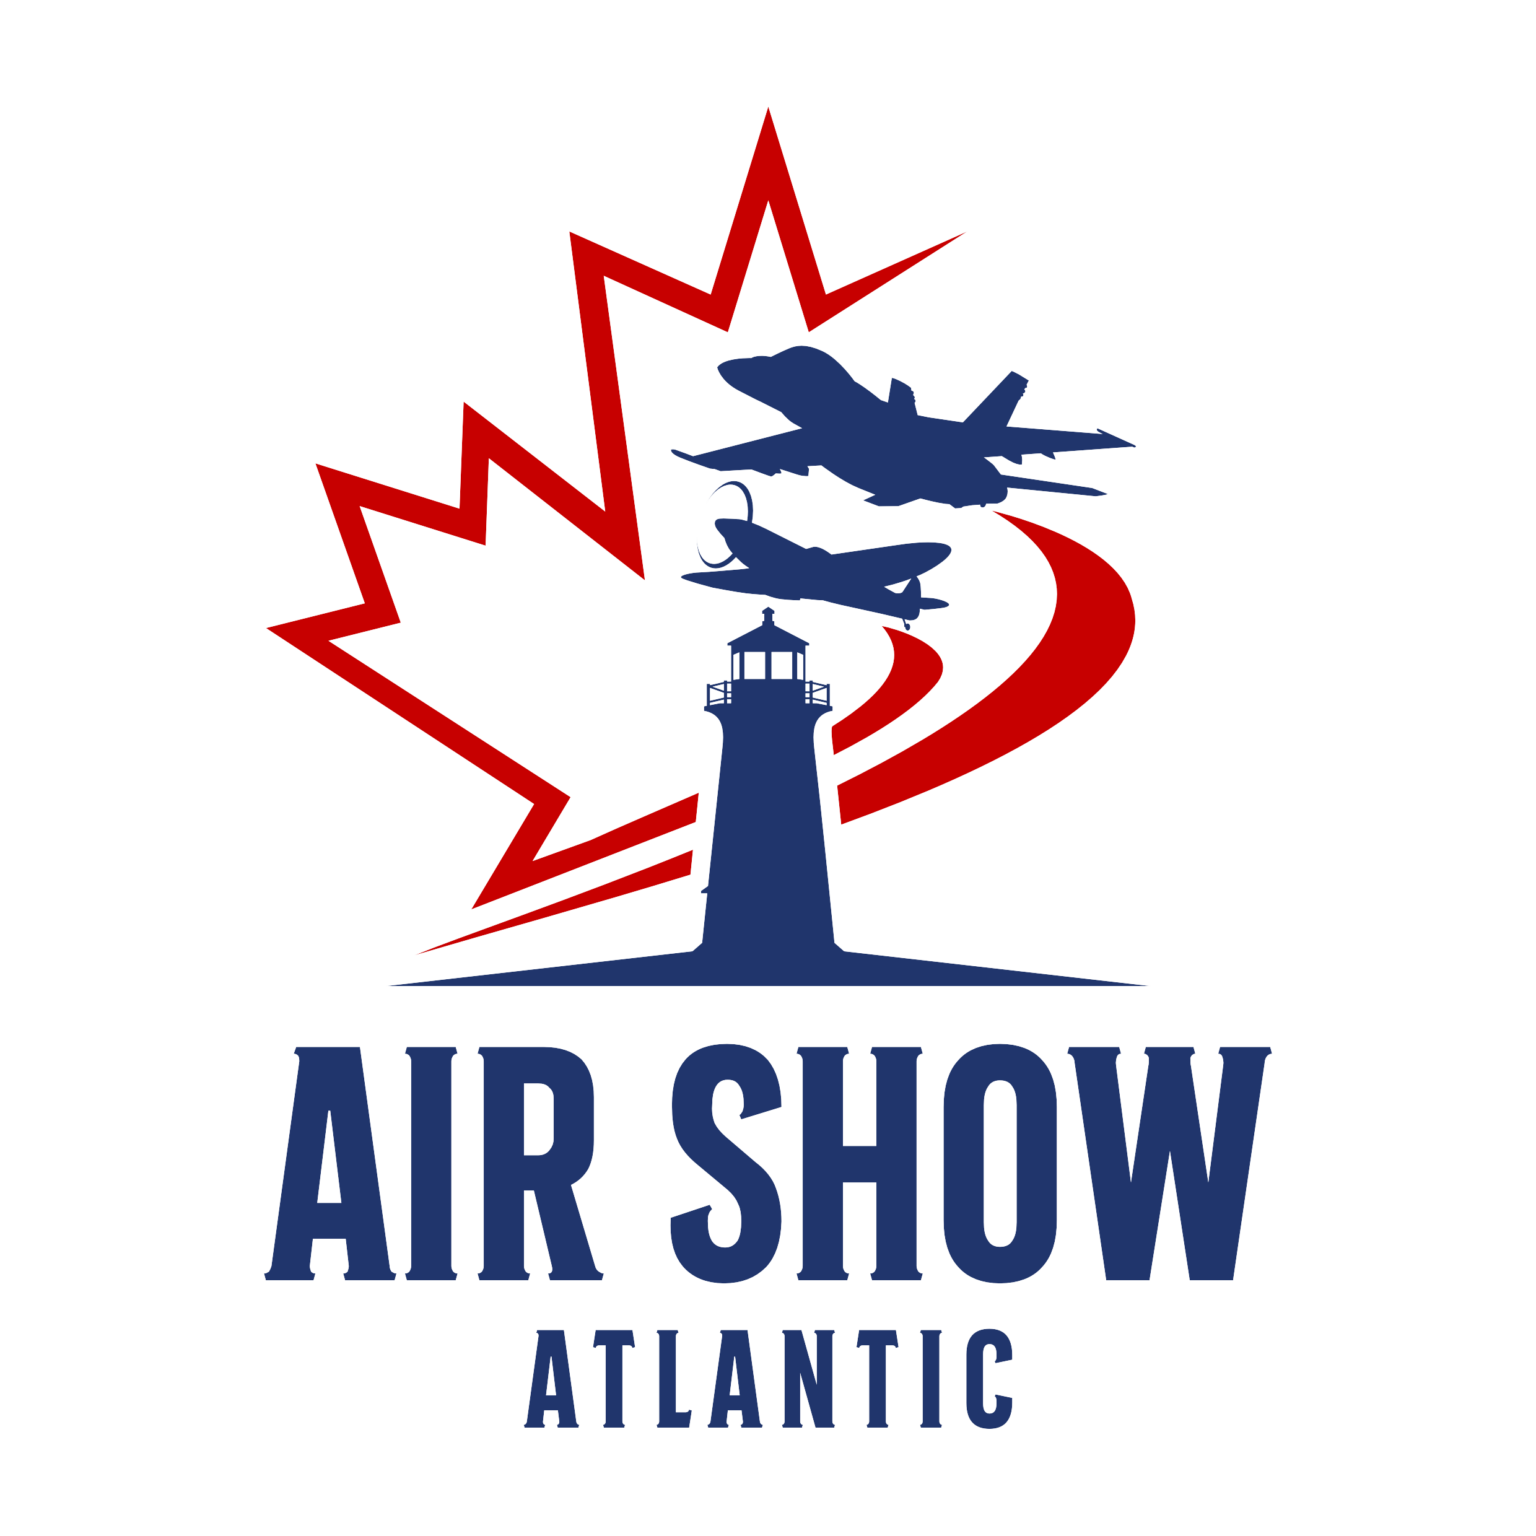 About Air Show Atlantic